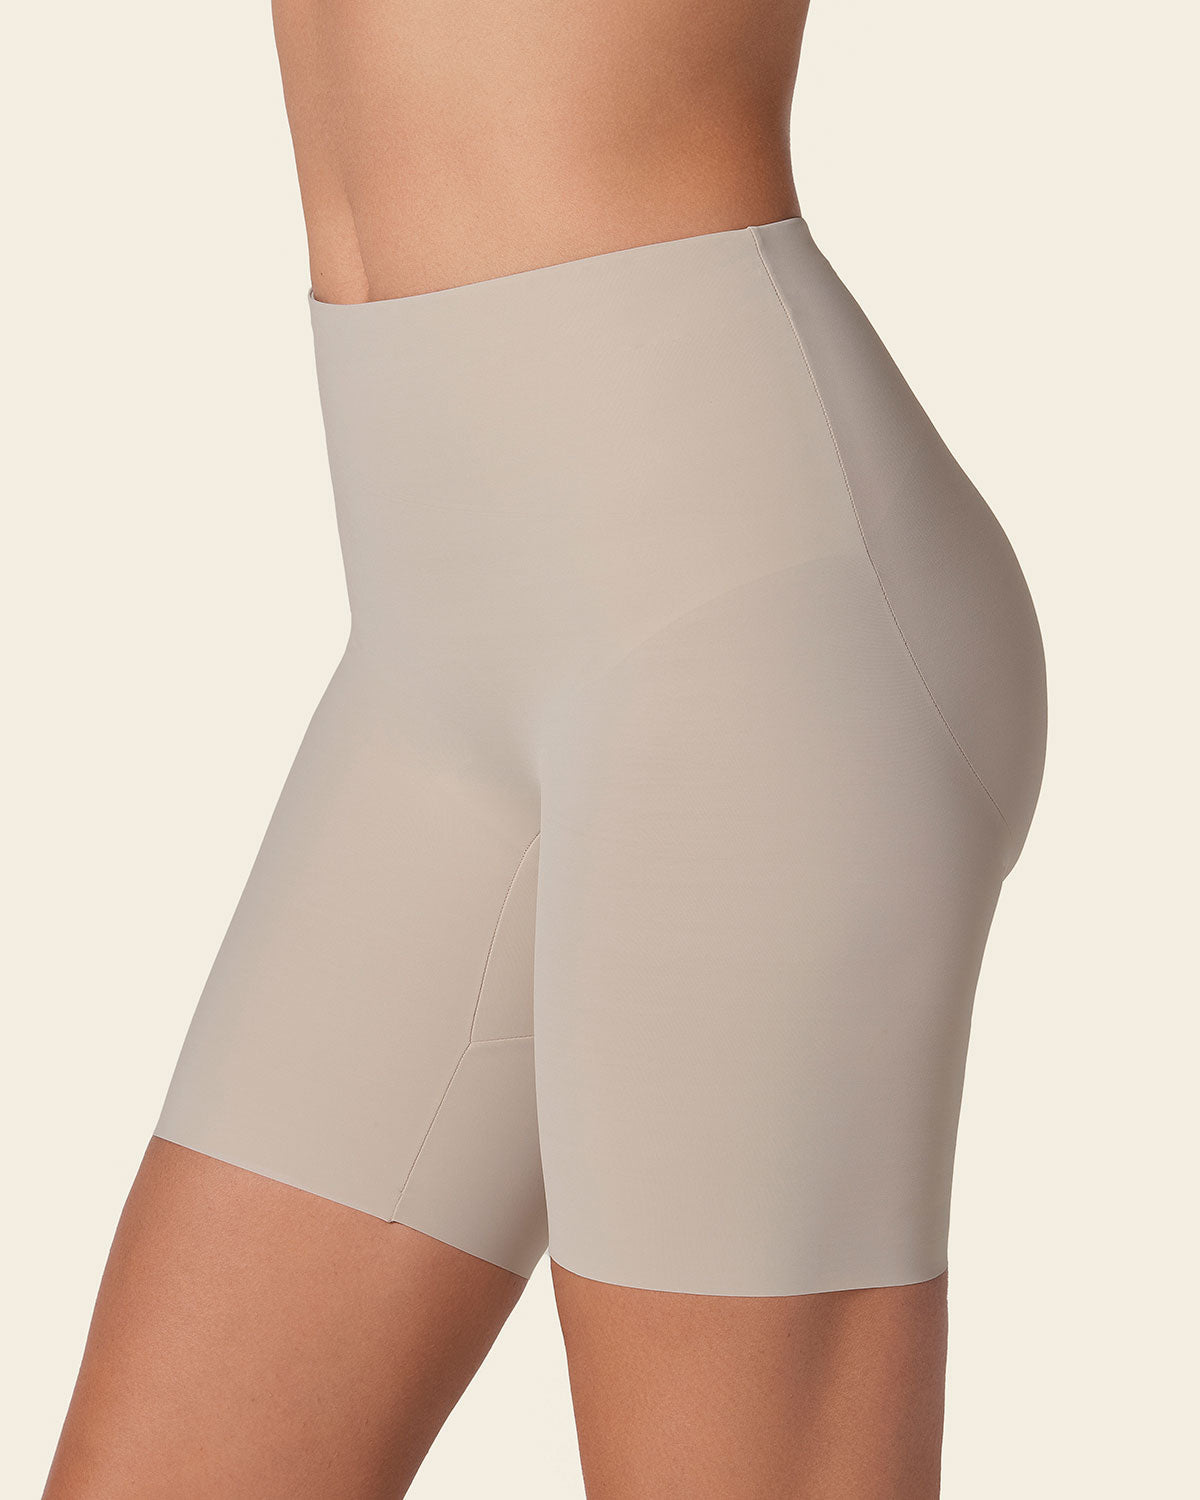 Shorts/Skirts Beige Butt Lifter Colombian Push Up Levanta Cola